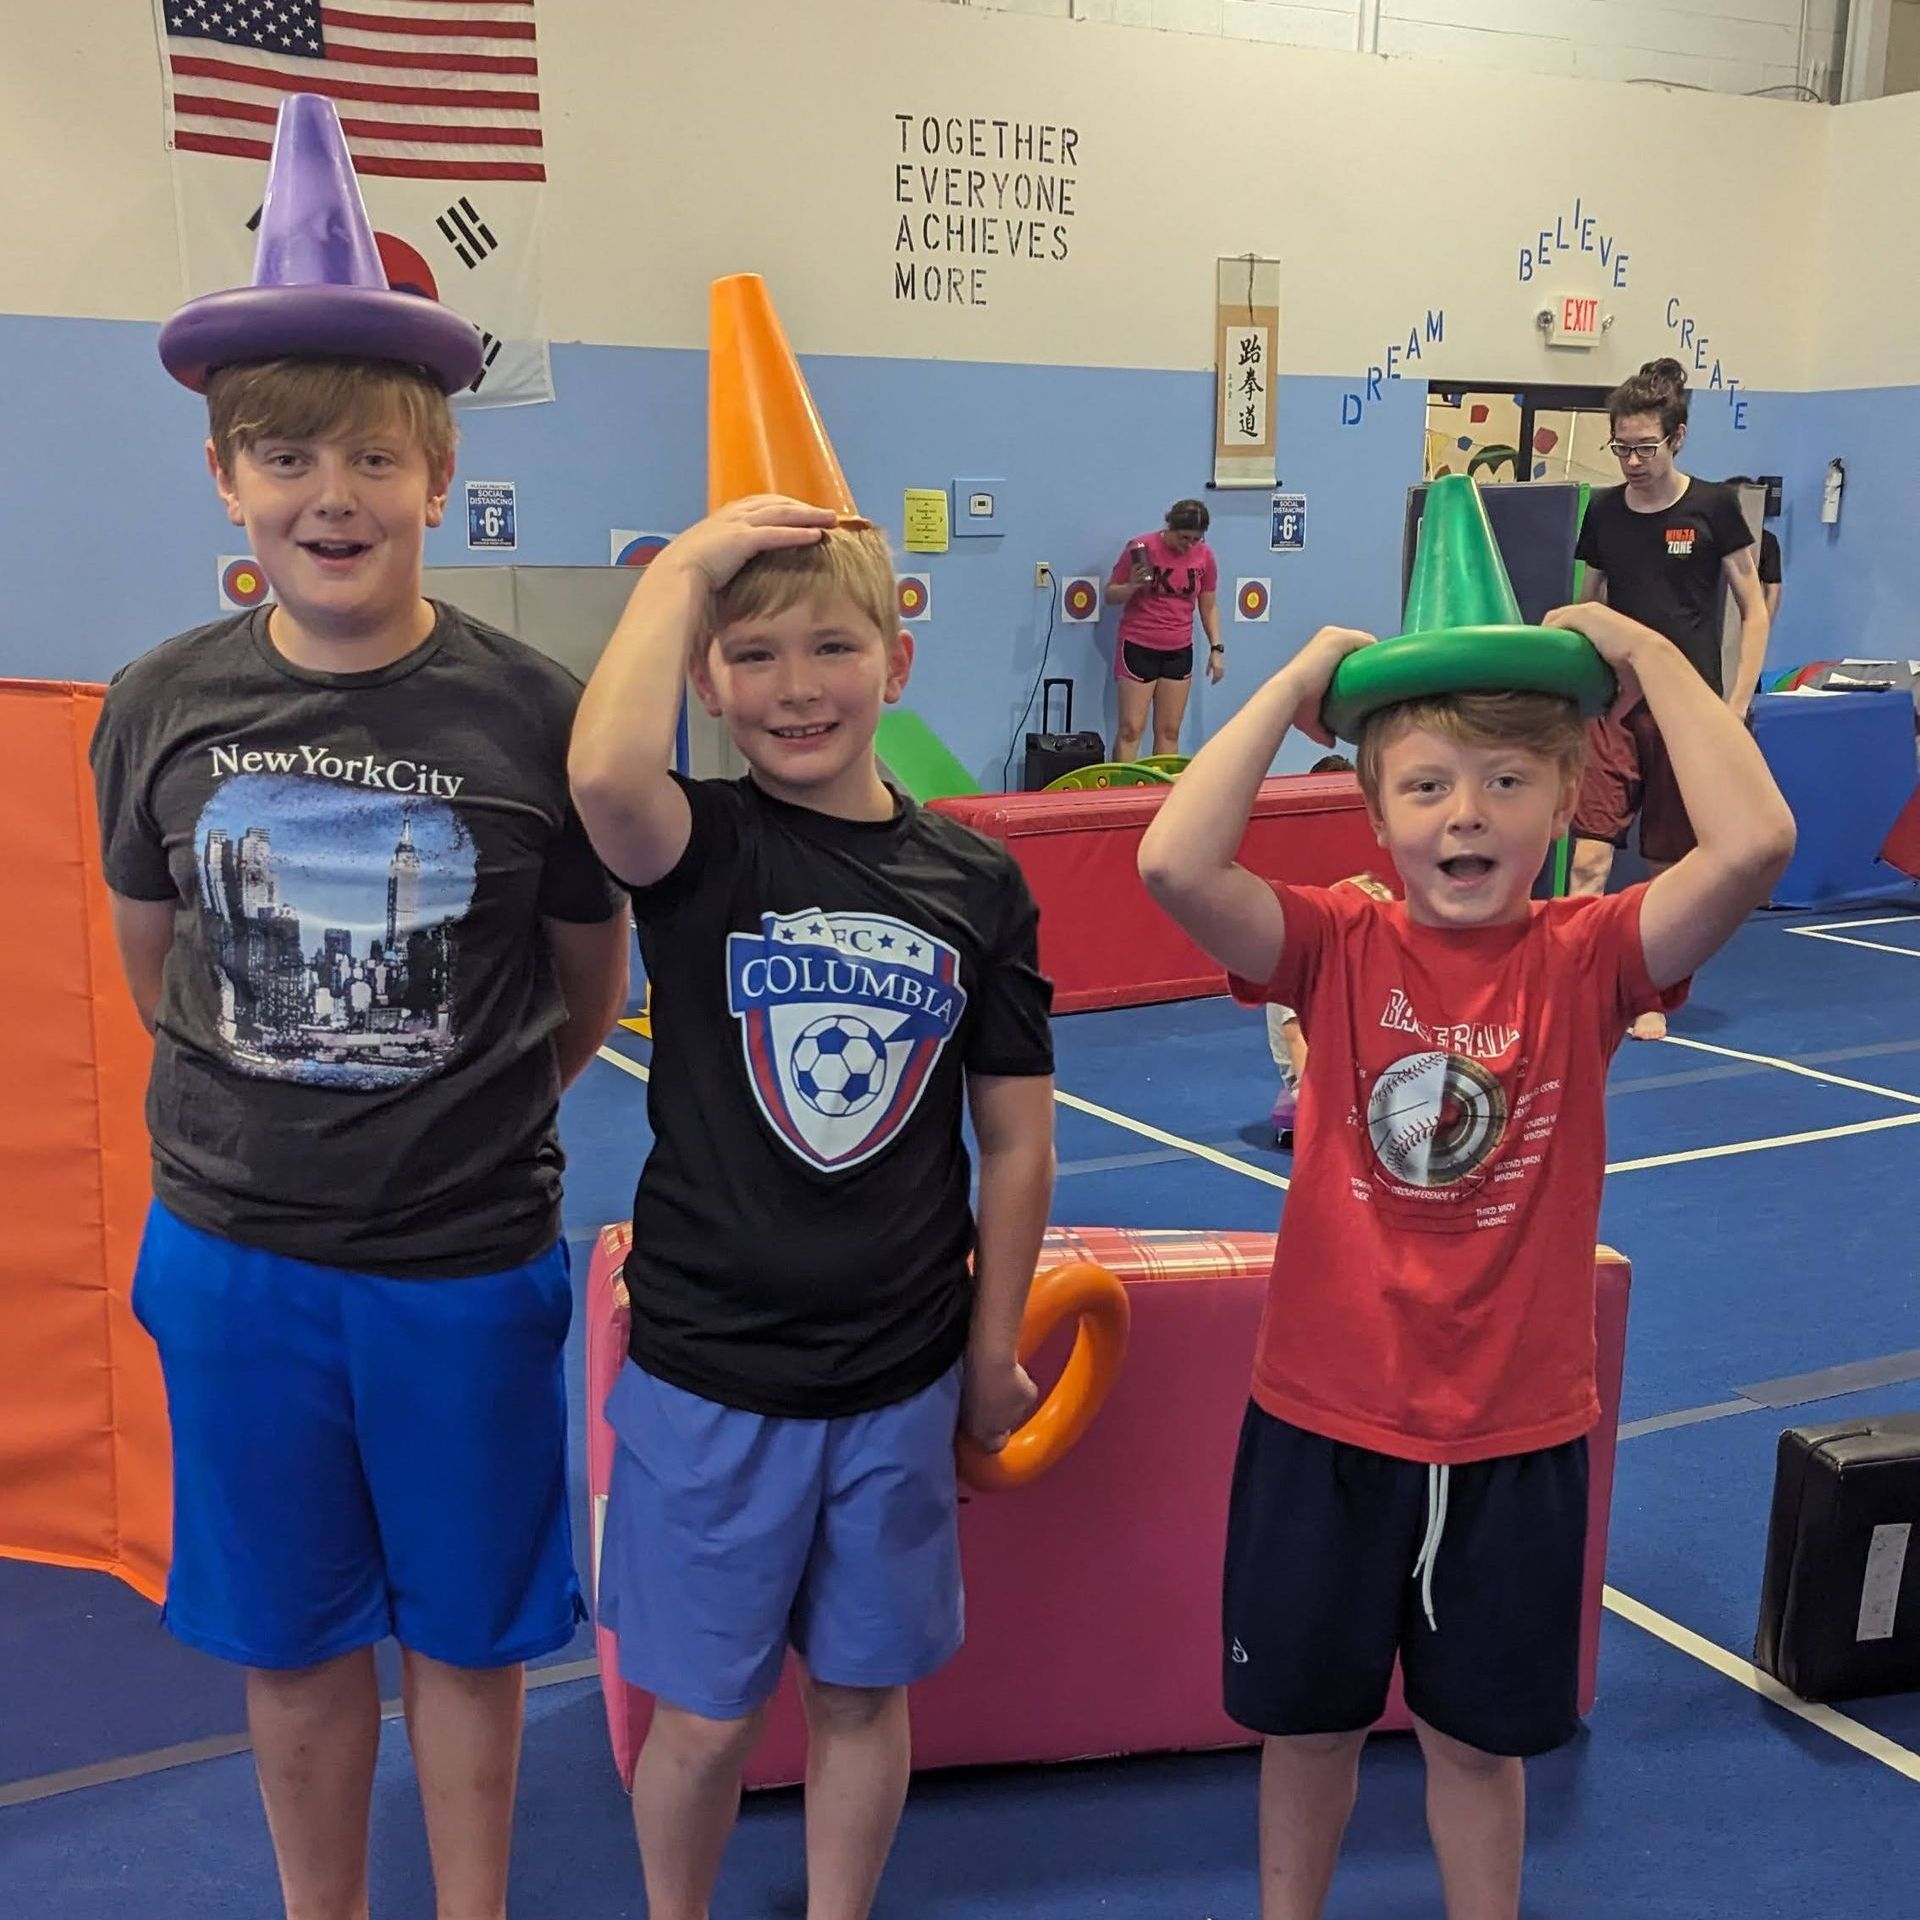 Three young boys are standing in a gym wearing hats and shirts that say california